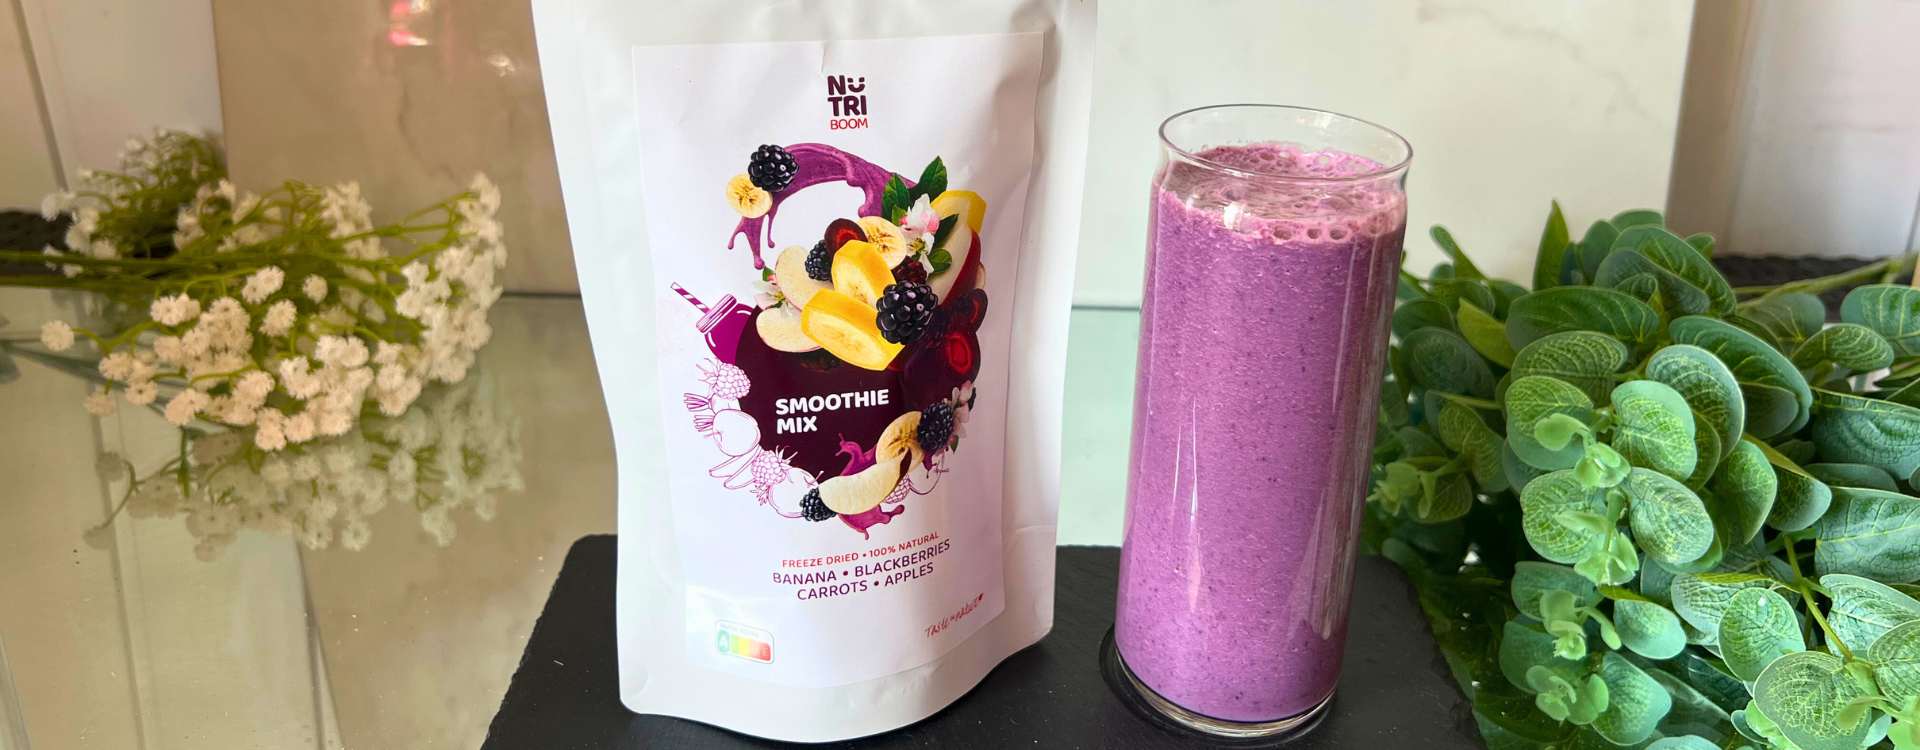 freeze-dried-smoothies-ready-to-blend-nutriboom-no-added-sugar-healthy-snacks-plant-based-sustainable-food-nutrient-dense-recipe-mobile1